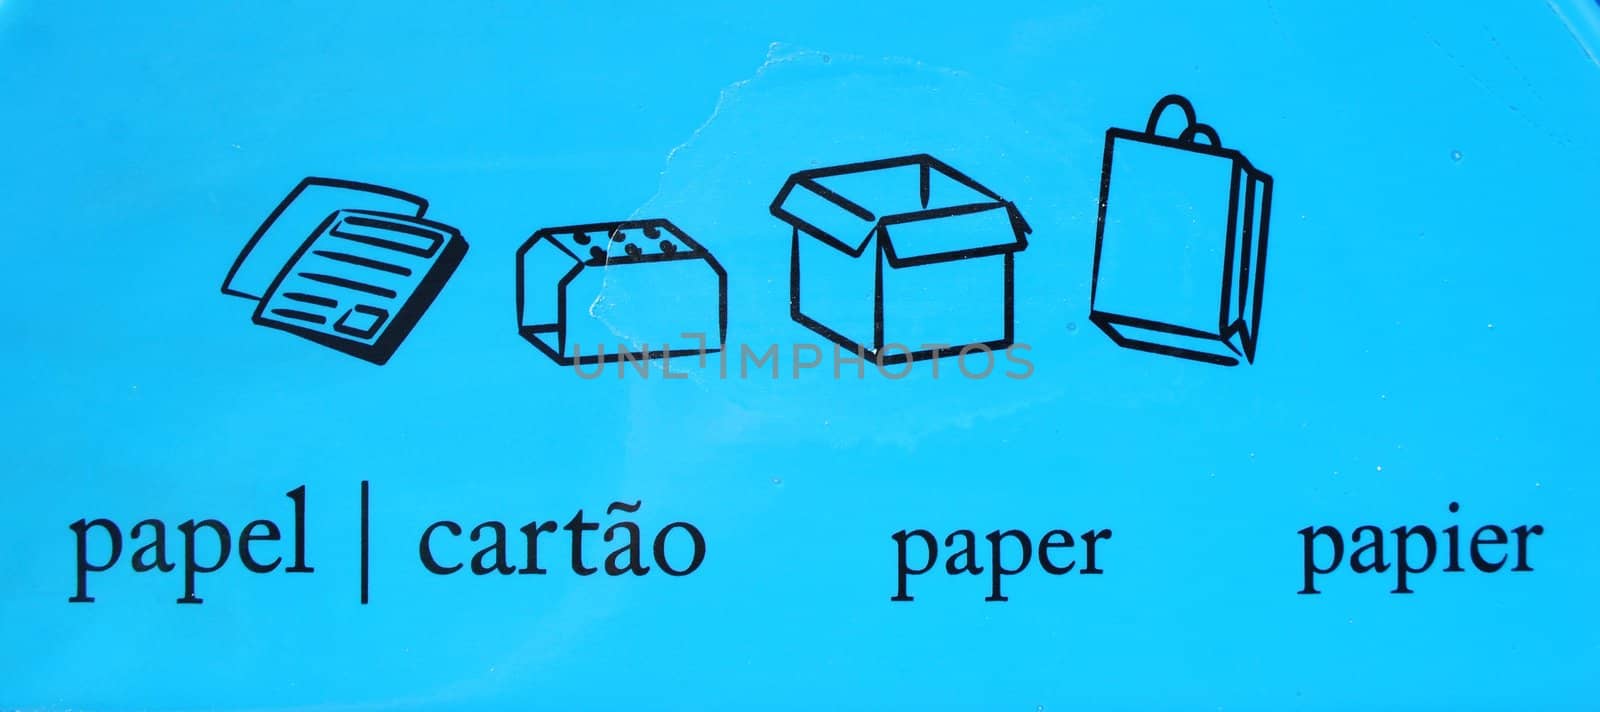 Paper recycle symbols in different languages by luissantos84